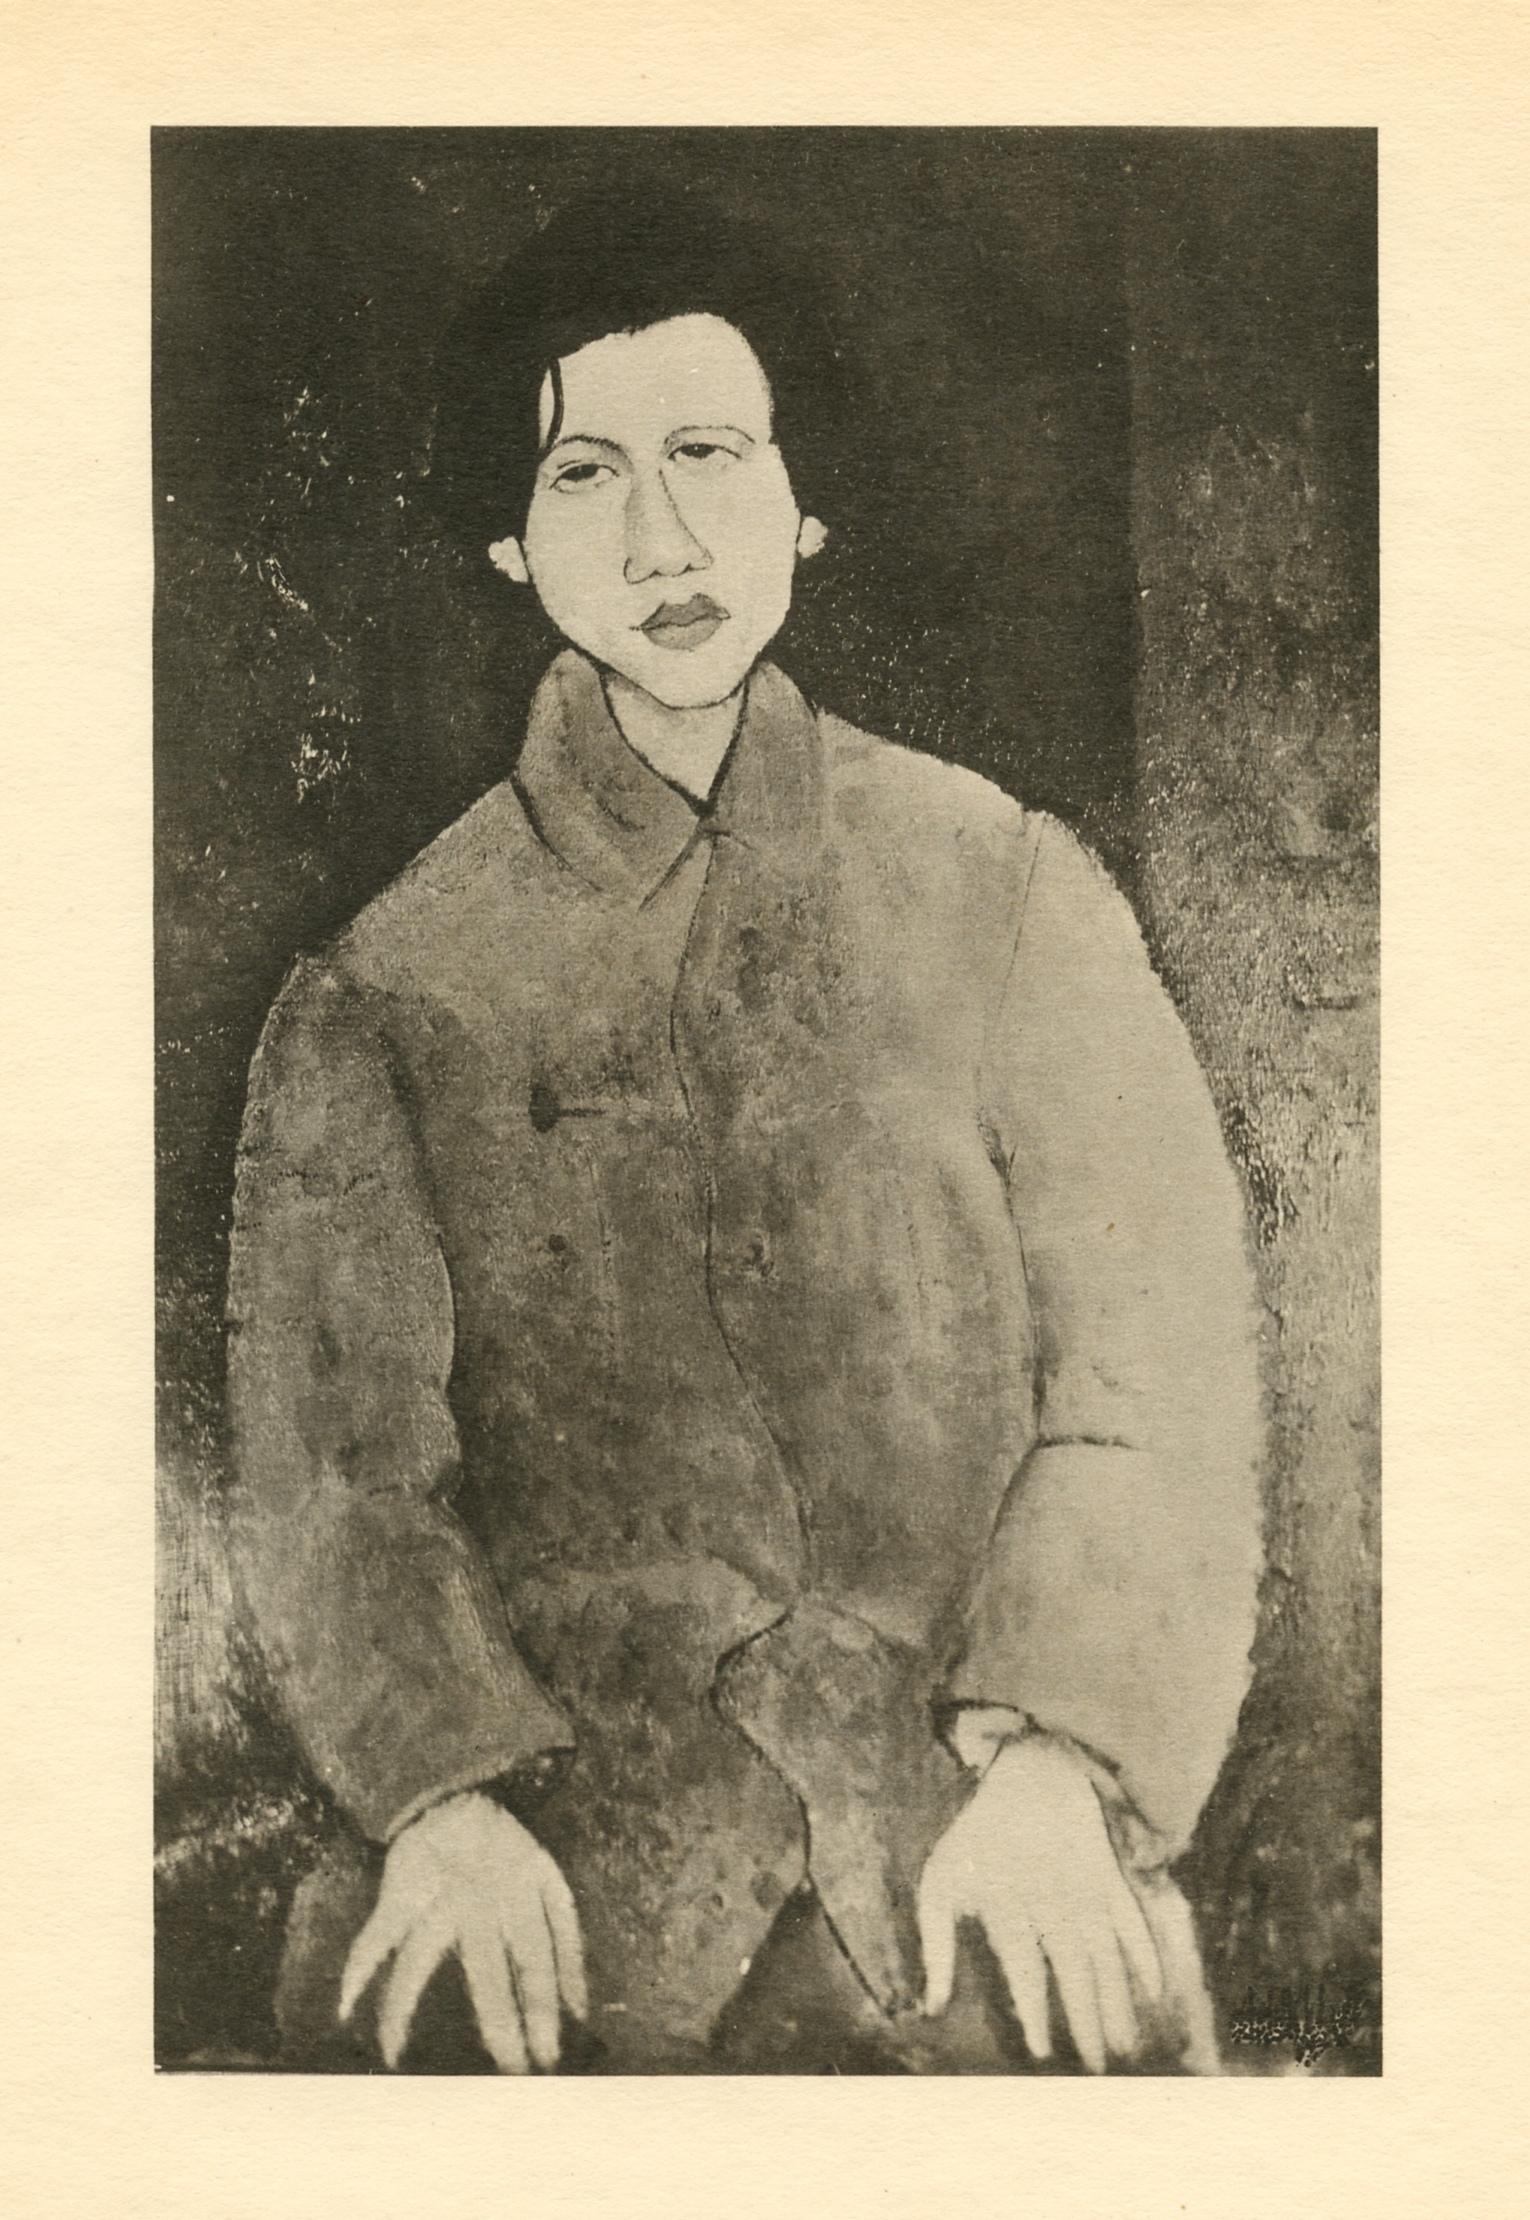 Medium: collotype (after the painting). Printed in 1926 at the Leon Marotte atelier and published in an edition of 1000 by Editions des Quatre Chemins. Image size: 8 x 5 inches (206 x 130 mm). Sheet size: 11 x 8 1/4 inches (280 x 210 mm). Not